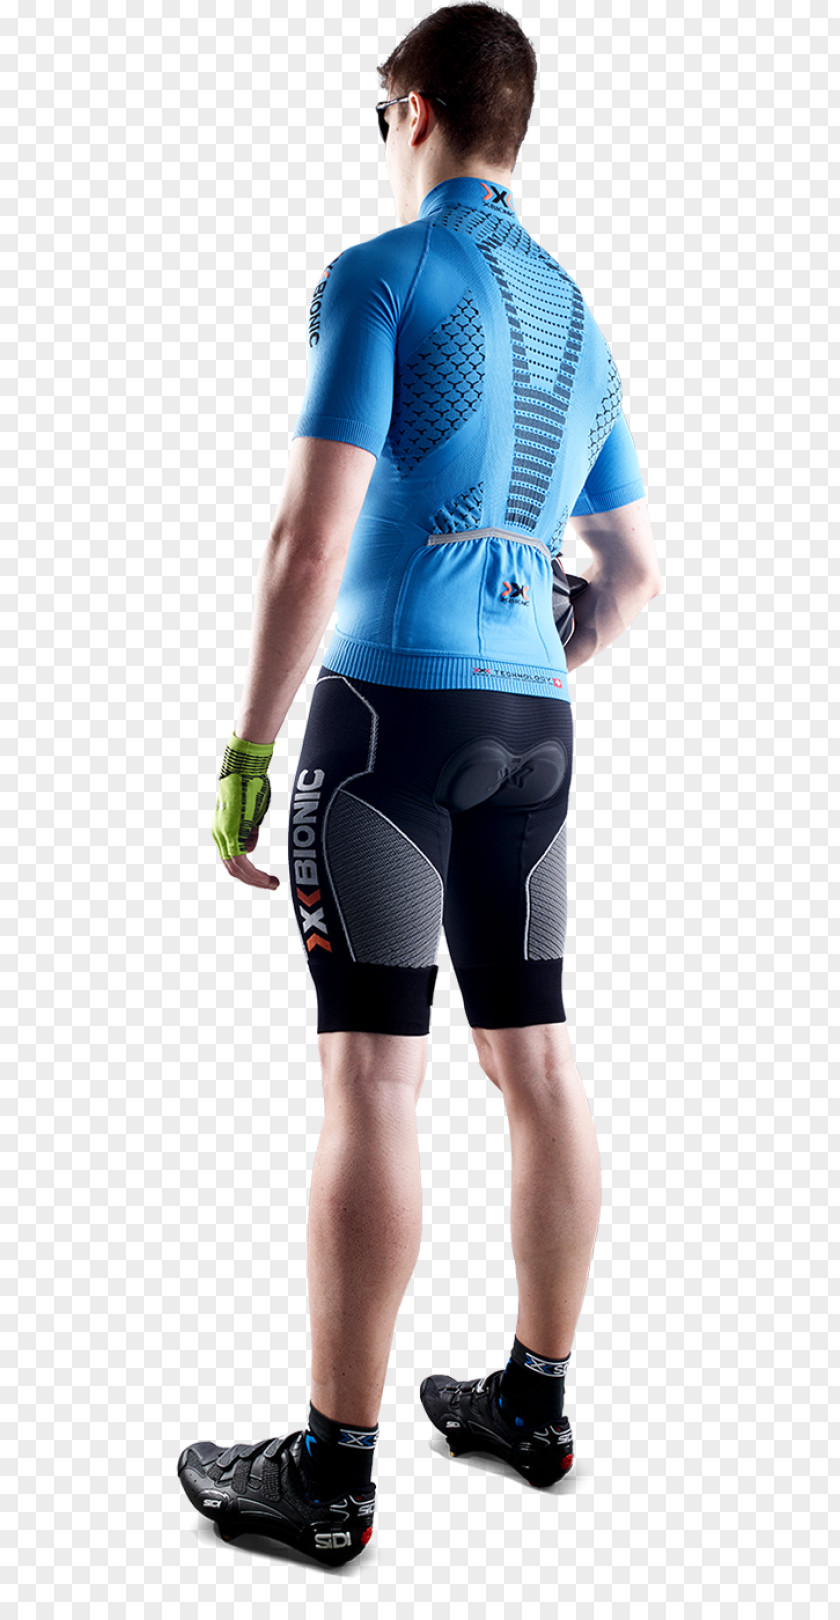 Natural Human Body Temps Men X-BIONIC Twyce Bicycle Cycling Pad Shorts Structure PNG